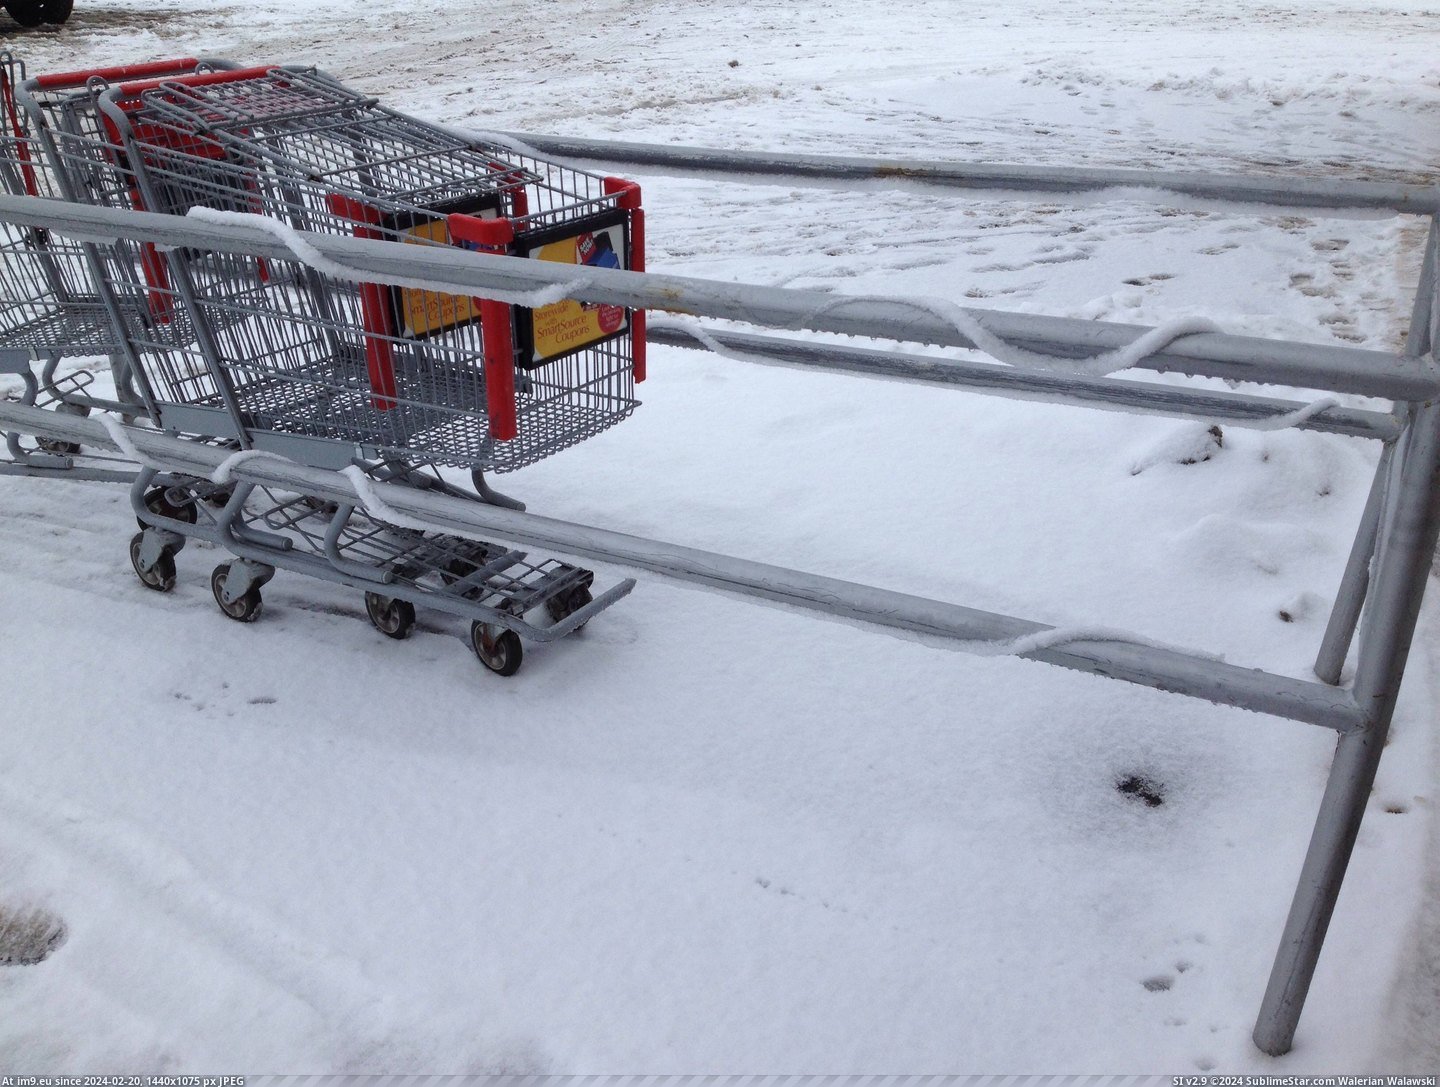 #Snow #Now #Snake #Return #Melted #Bar #Stuck [Mildlyinteresting] The snow on this cart return stuck to the bar as it melted, now looks like snow snake. Pic. (Image of album My r/MILDLYINTERESTING favs))